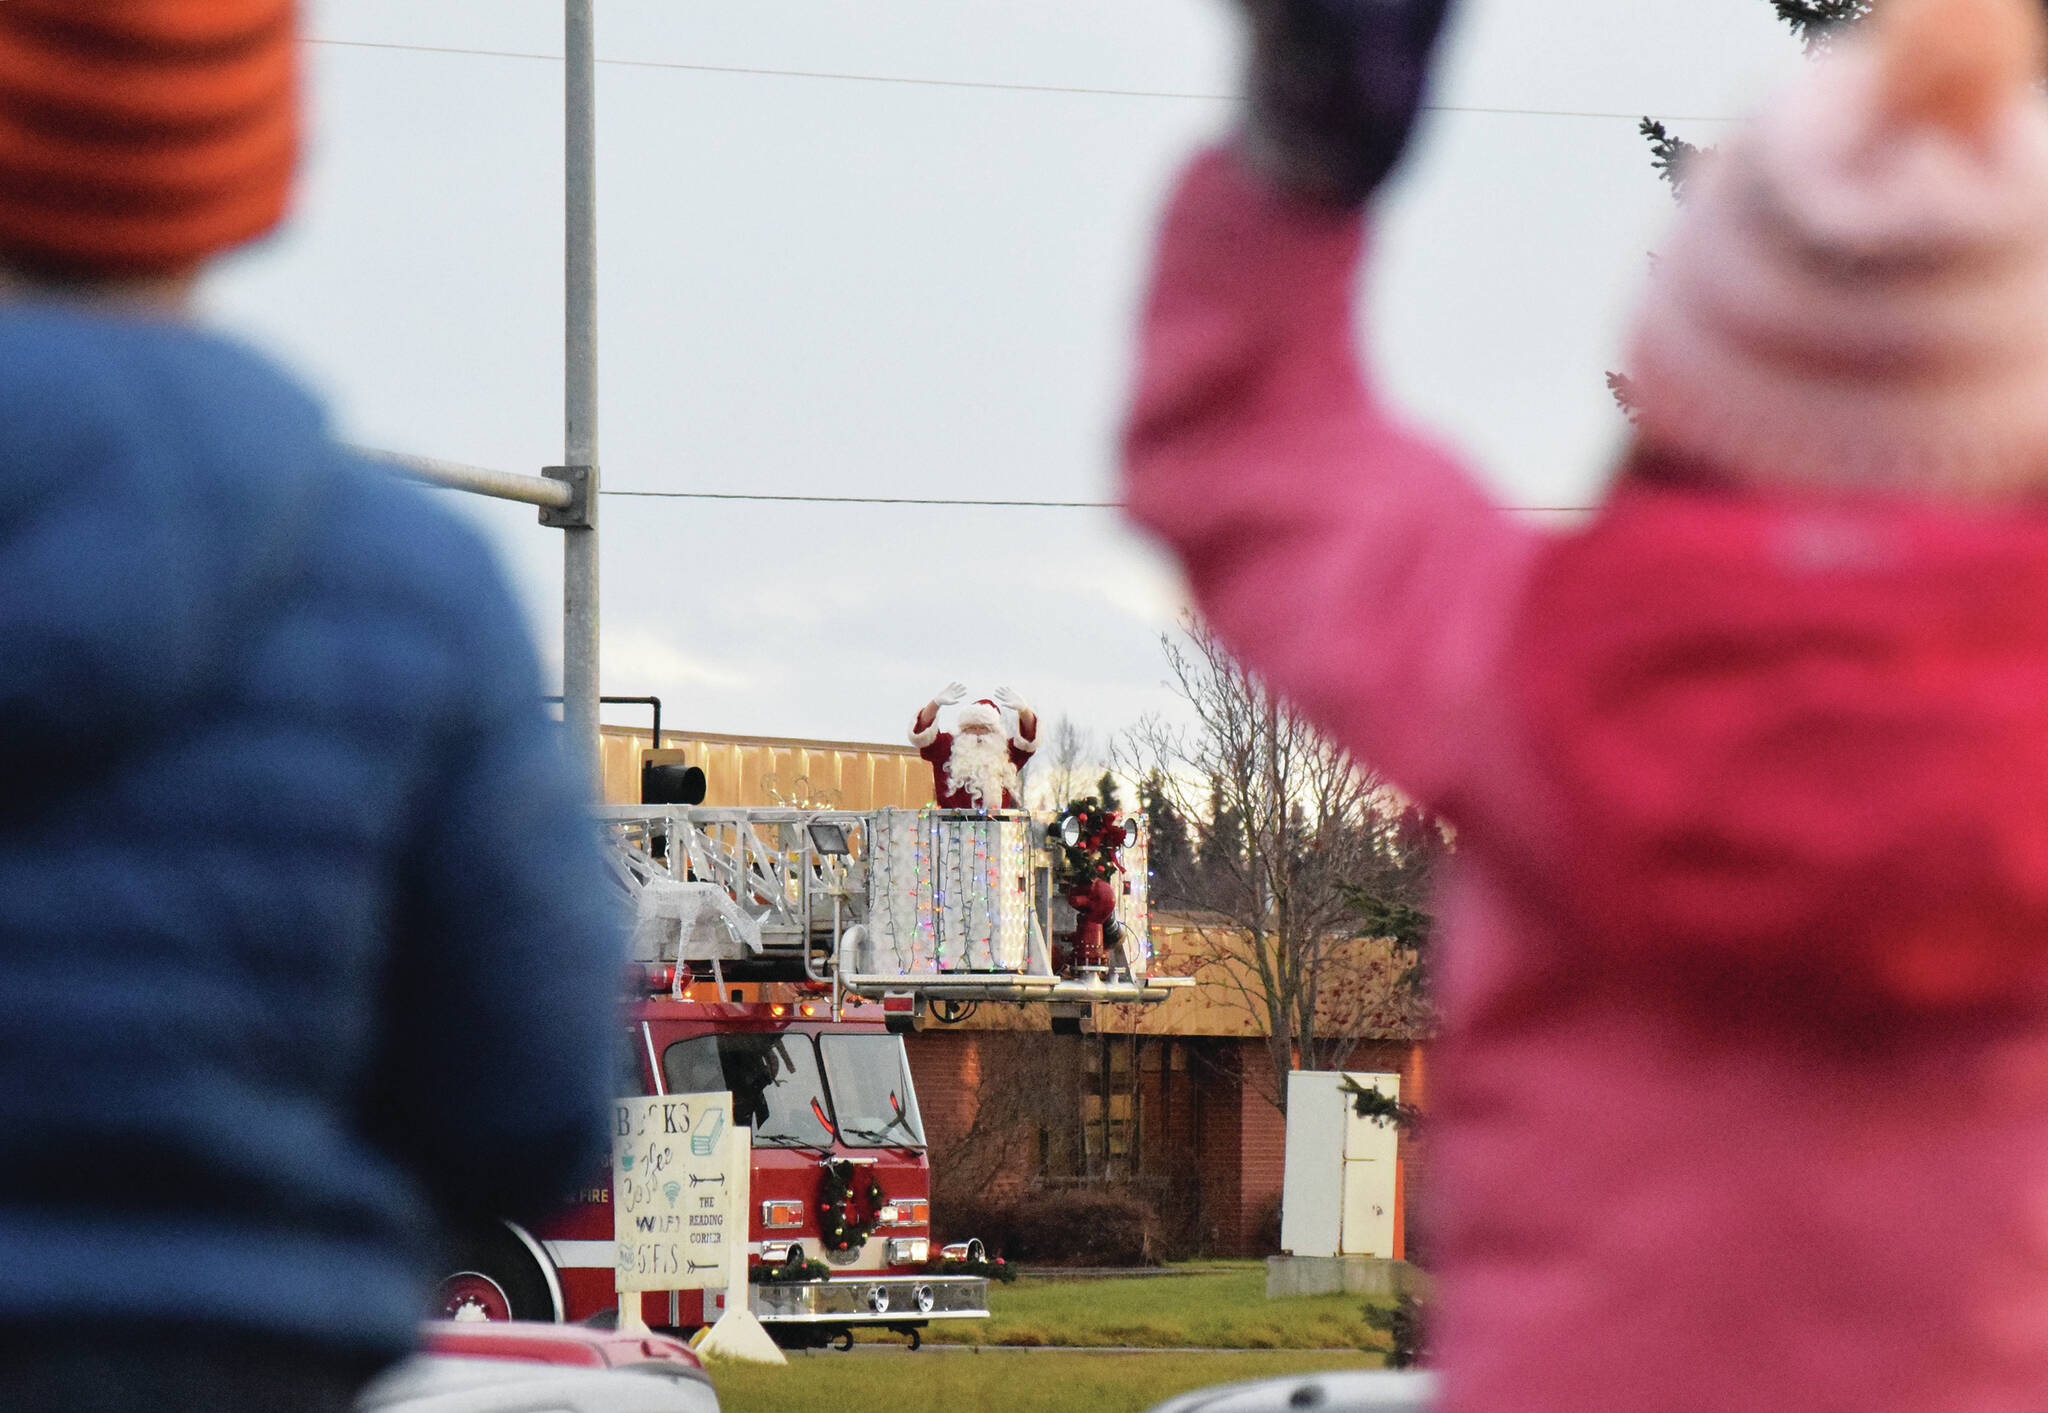 Children wave as Santa Claus arrives on top of a firetruck Friday, Nov. 29, 2019, at the Christmas Comes to Kenai celebration at the Kenai Visitor and Cultural Center. (Photo by Joey Klecka/Peninsula Clarion)